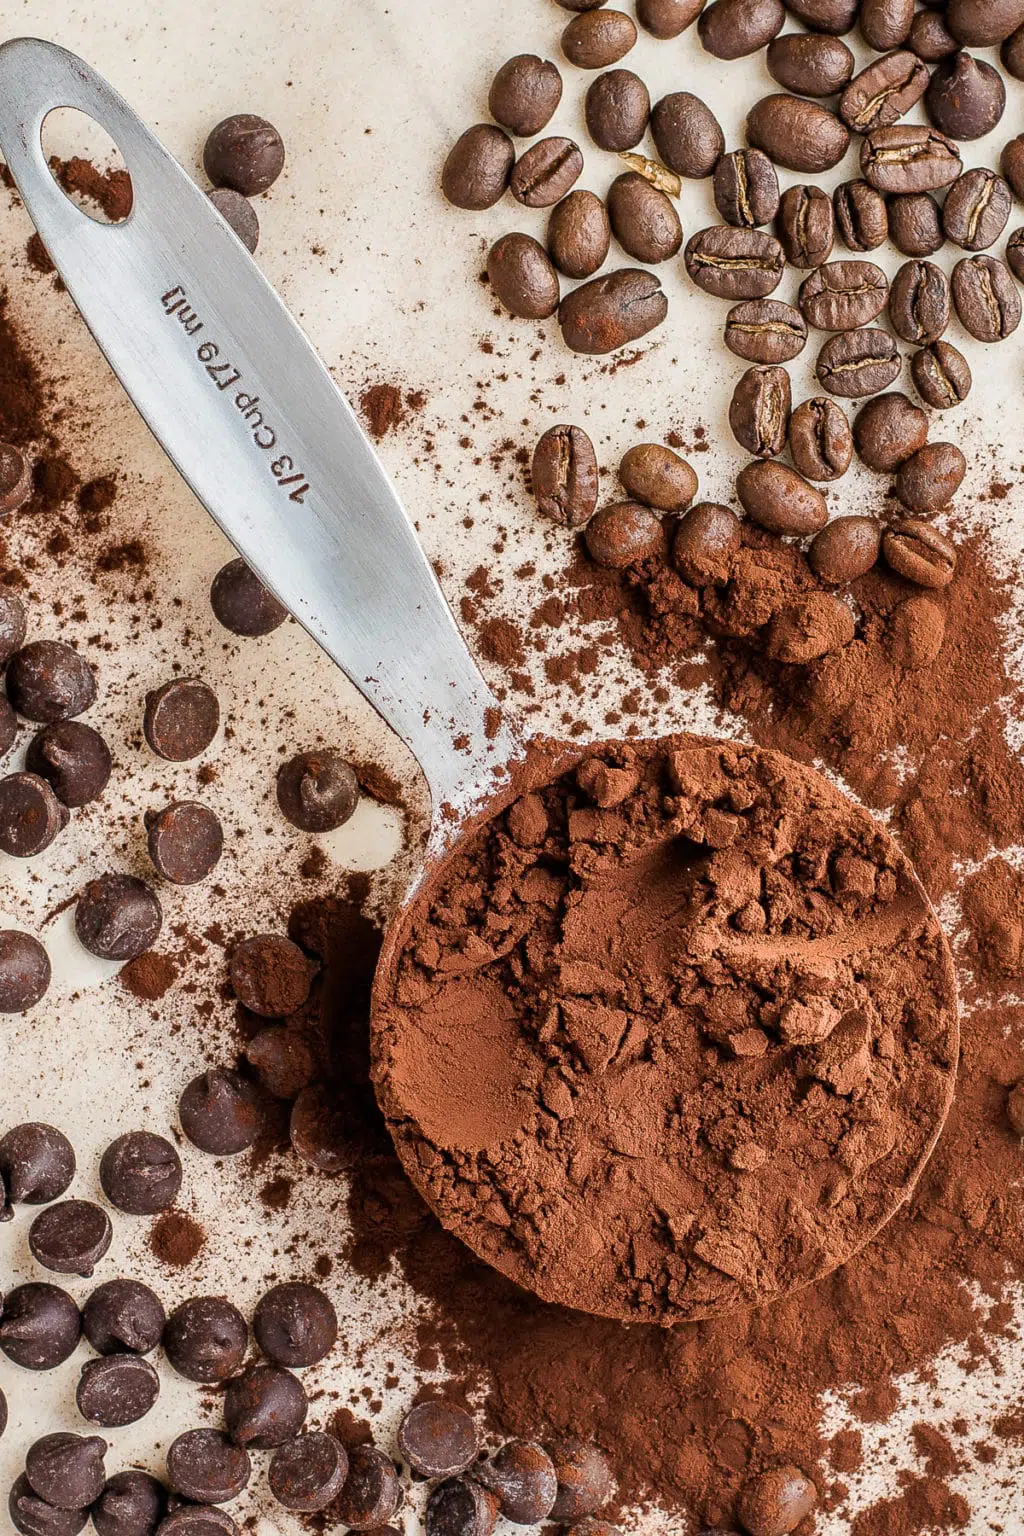 A scoop full of cocoa powder with chocolate chips scattered around it.